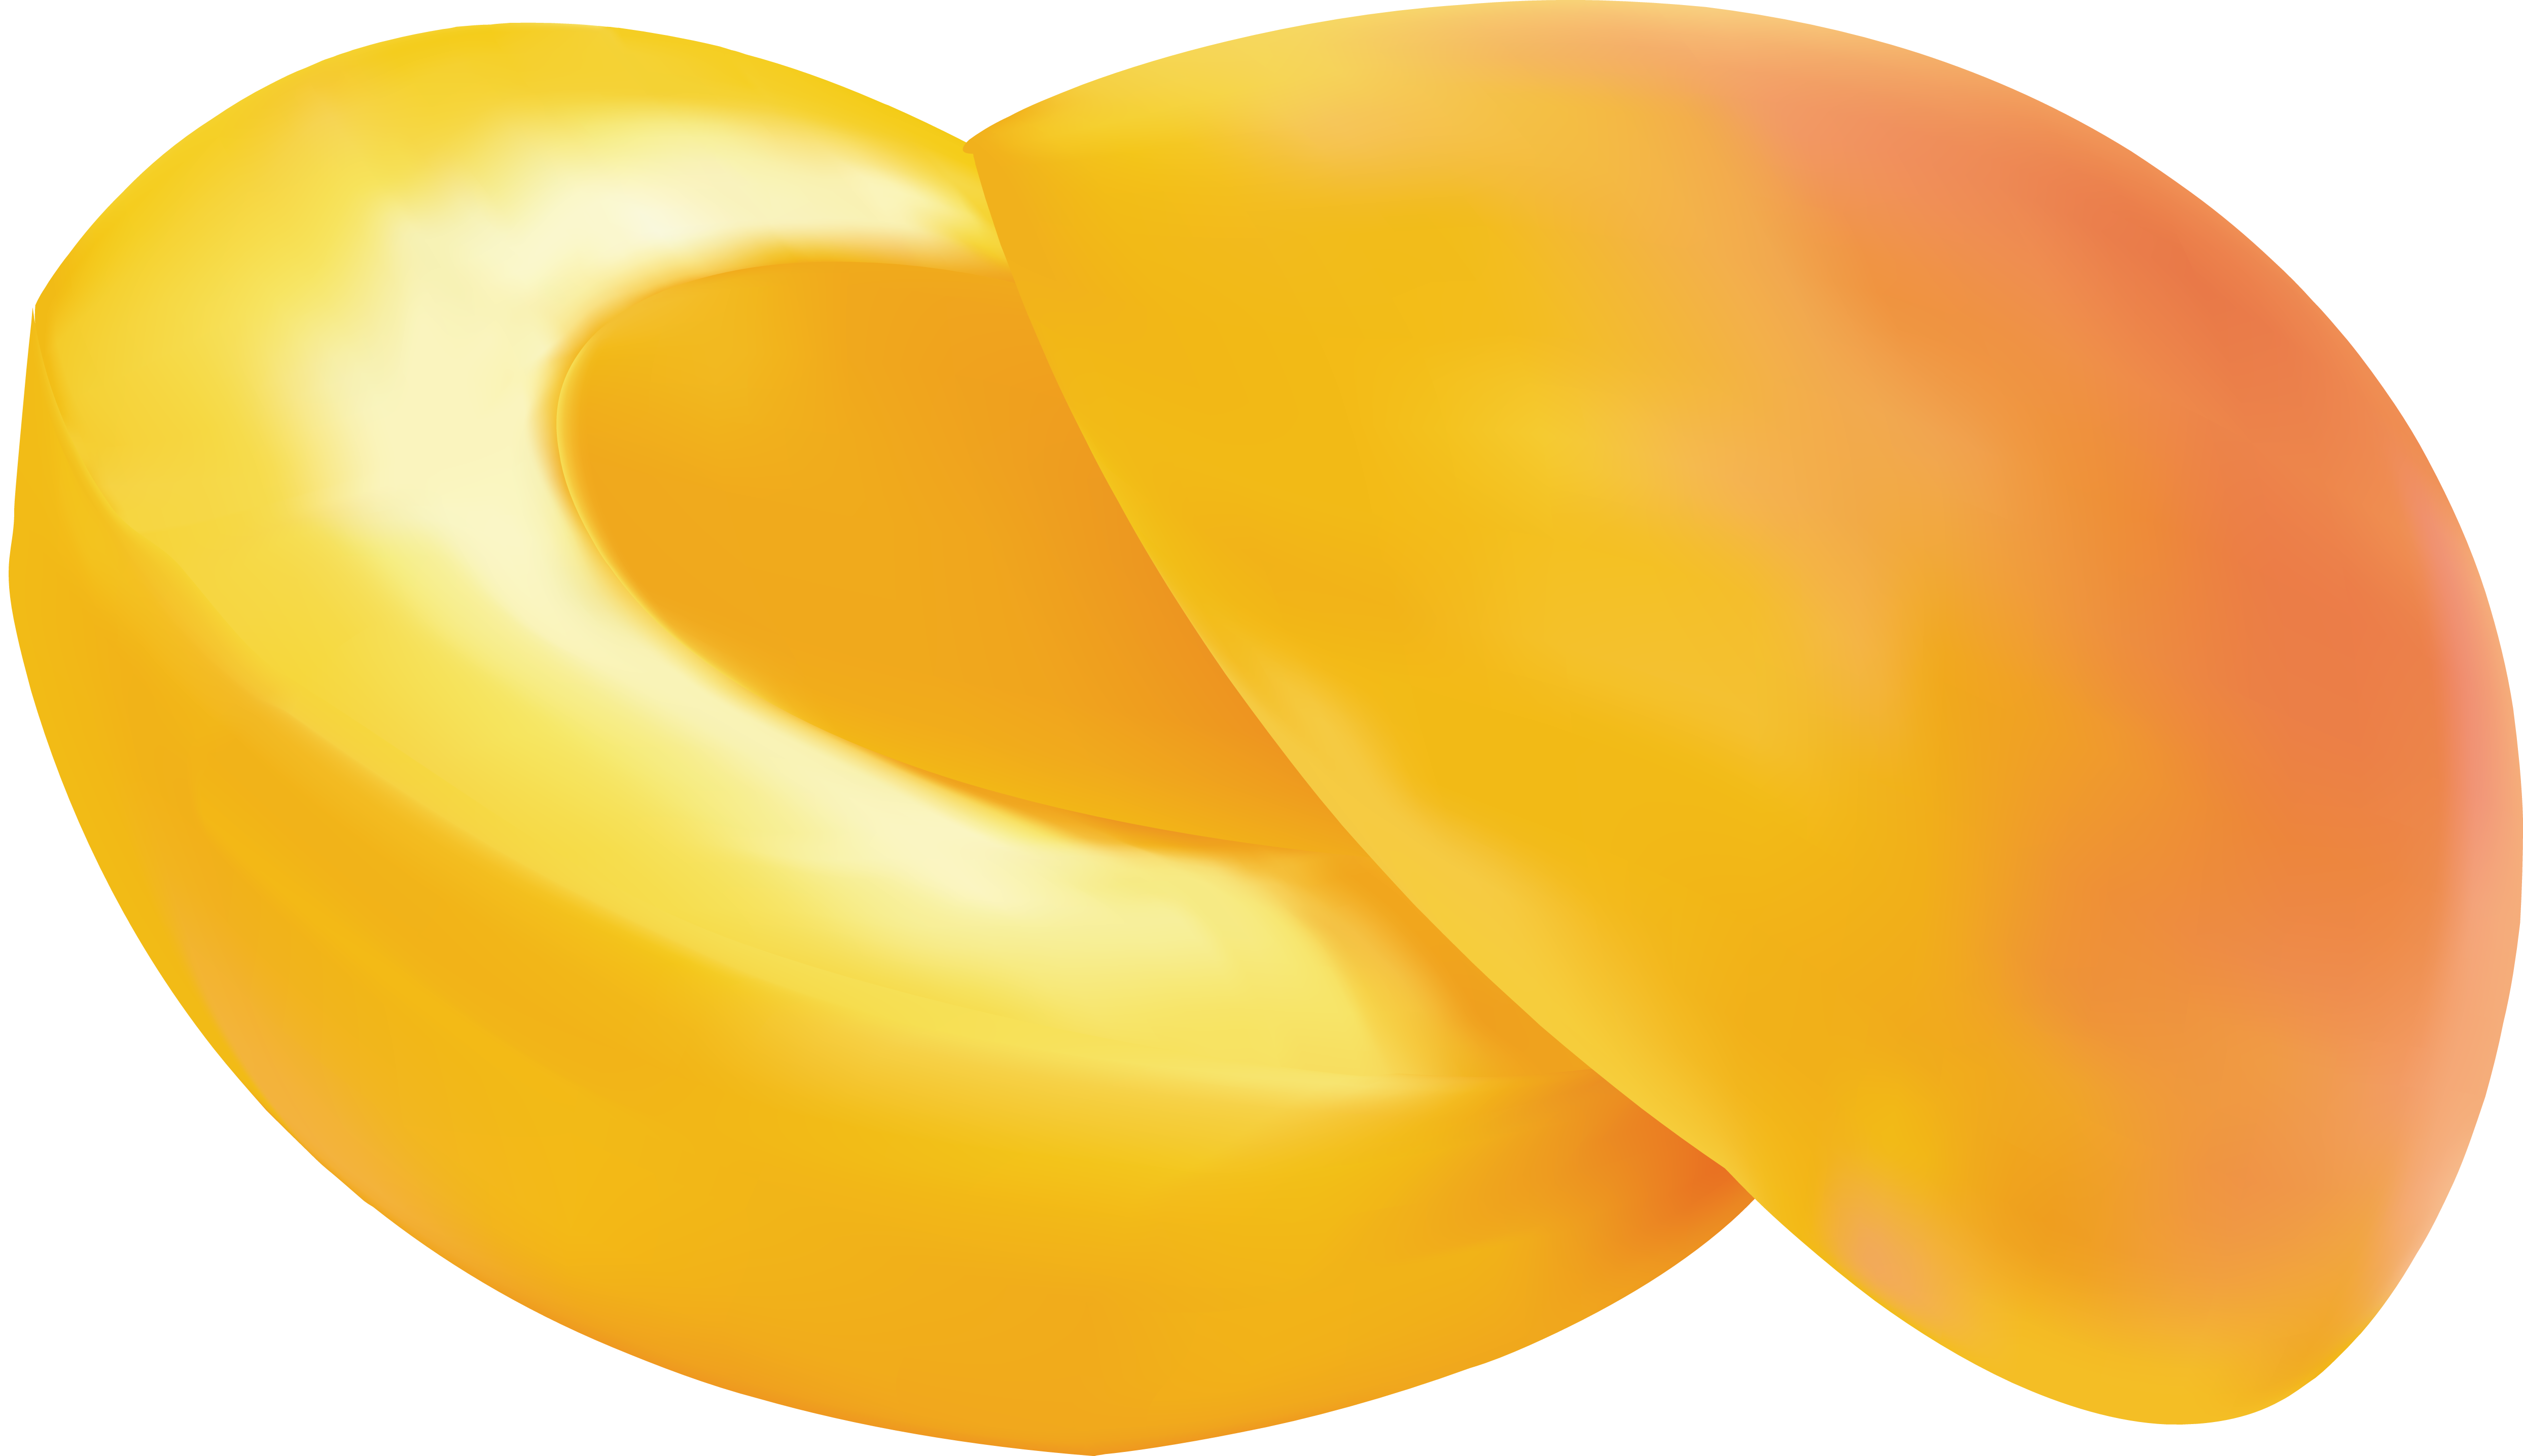 Png image purepng free. Fruit clipart peach